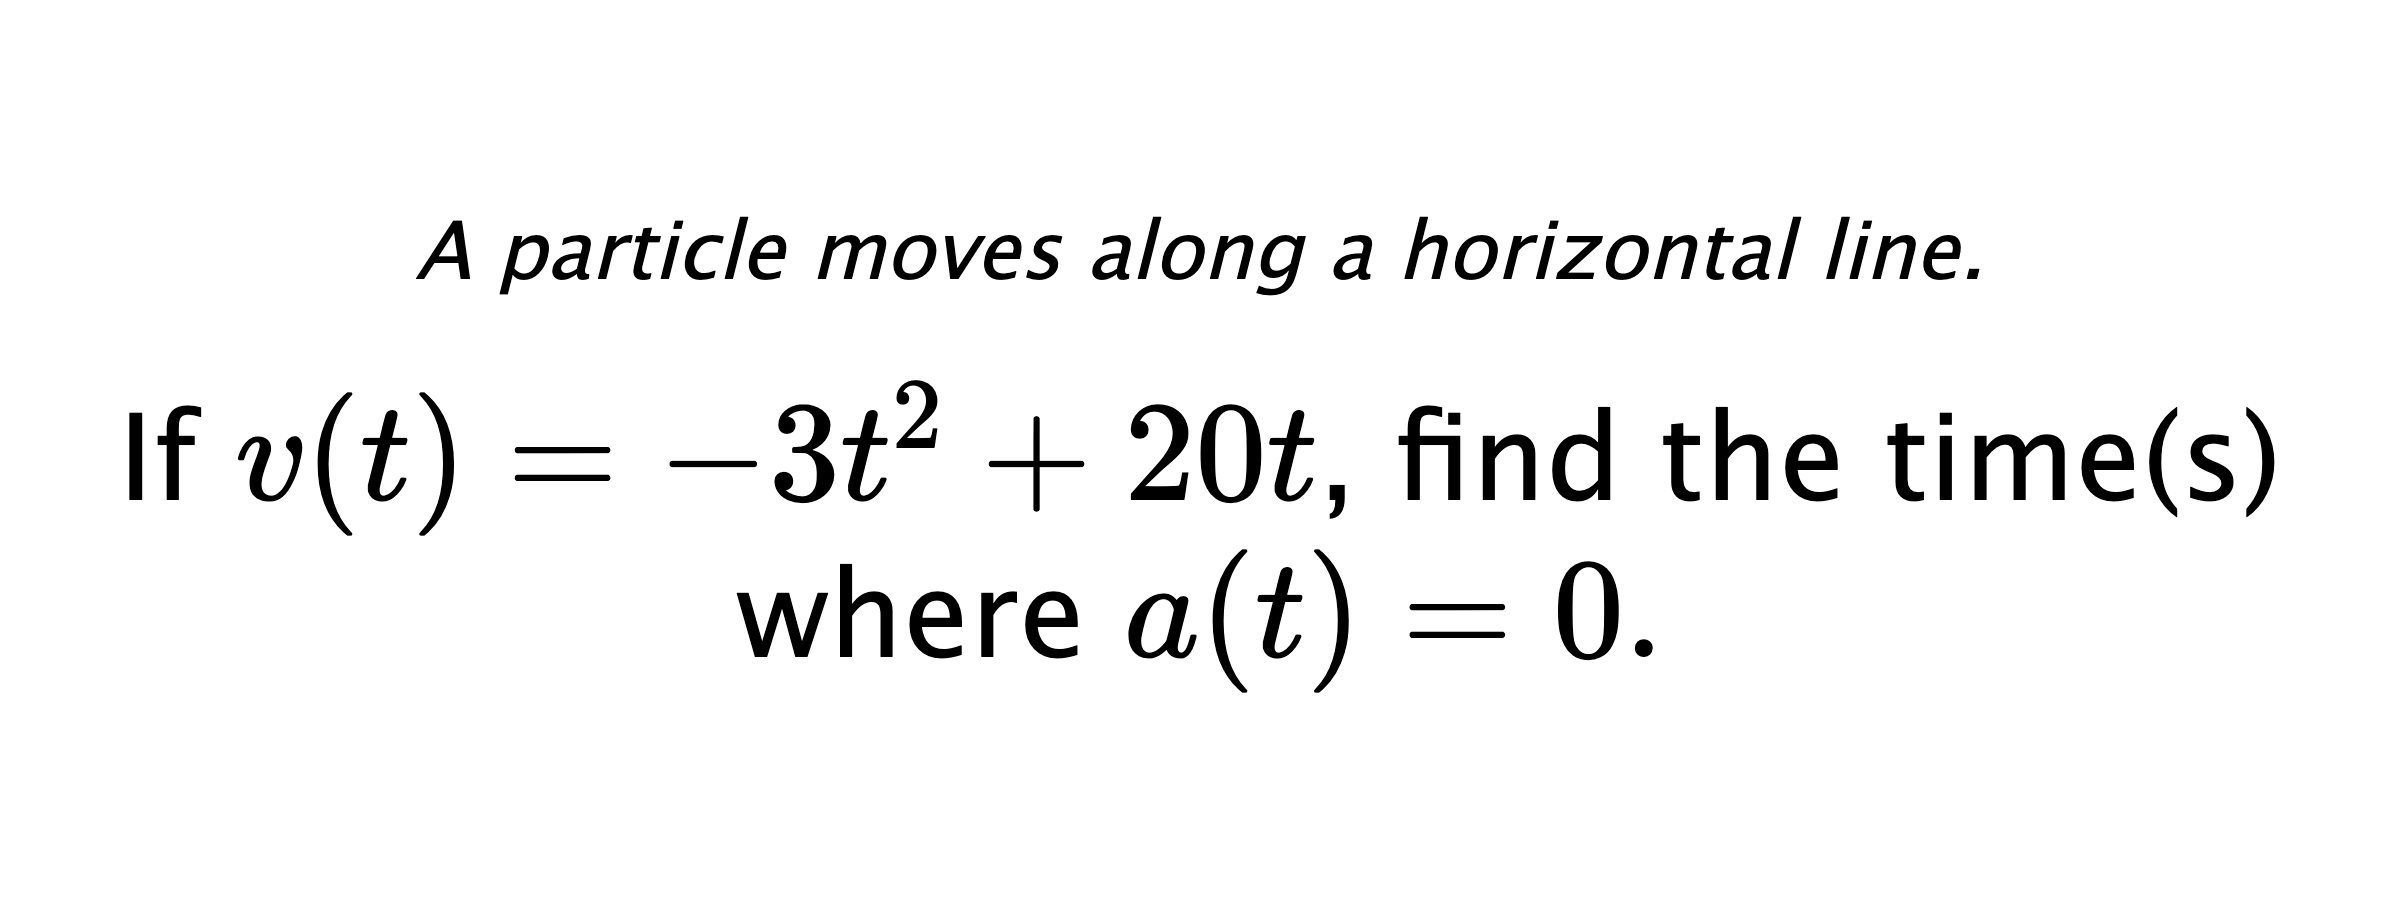 A particle moves along a horizontal line. If $ v(t)=-3t^2+20t $, find the time(s) where $ a(t)=0. $